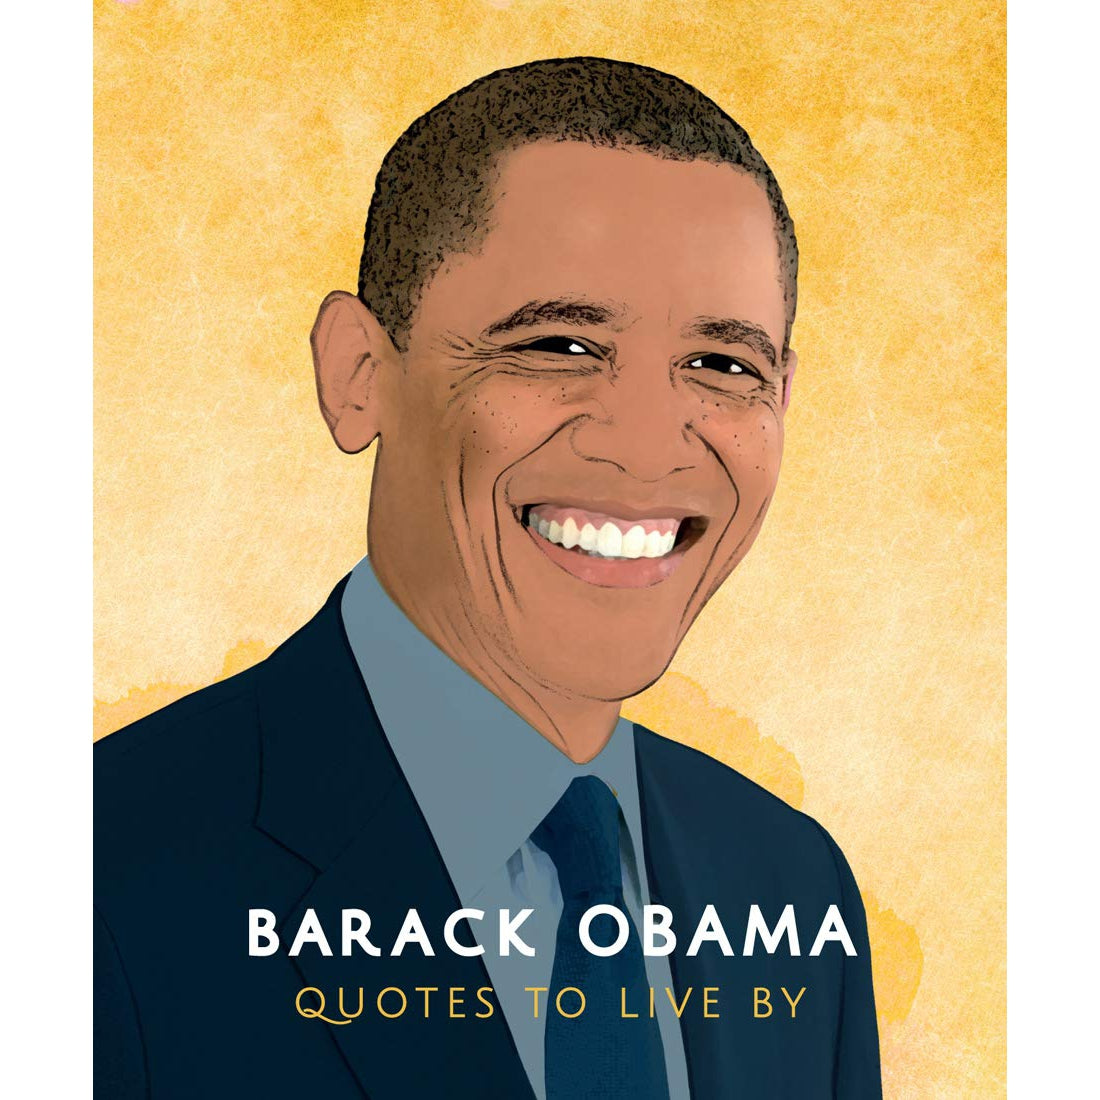 Barack Obama Quotes To Live By